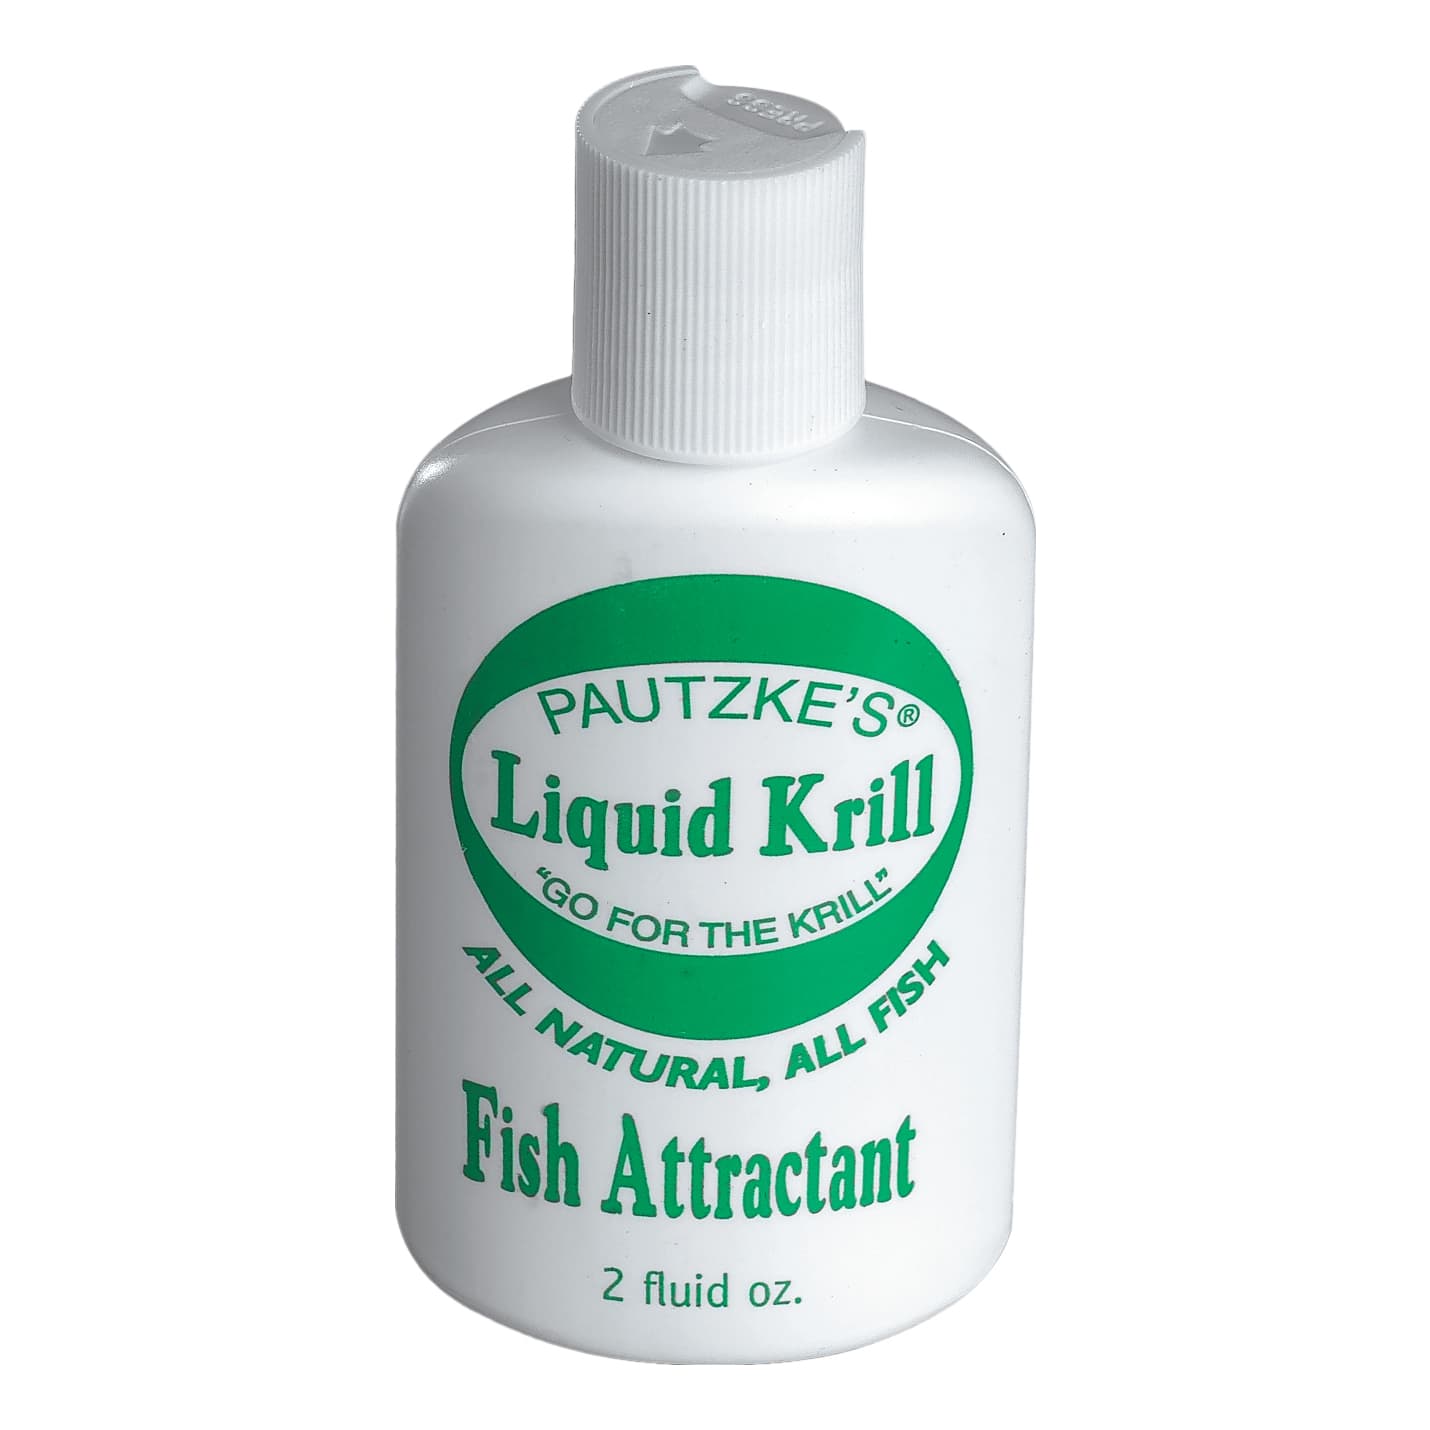  Fishbait Freshwater - Natural Fish Meal, Soybean Meal, Fish  Attractant, Freshwater Fish Bait for Crack, Tilapia, Trout, Tuna, Snapper  and Fishing Supplies : Sports & Outdoors